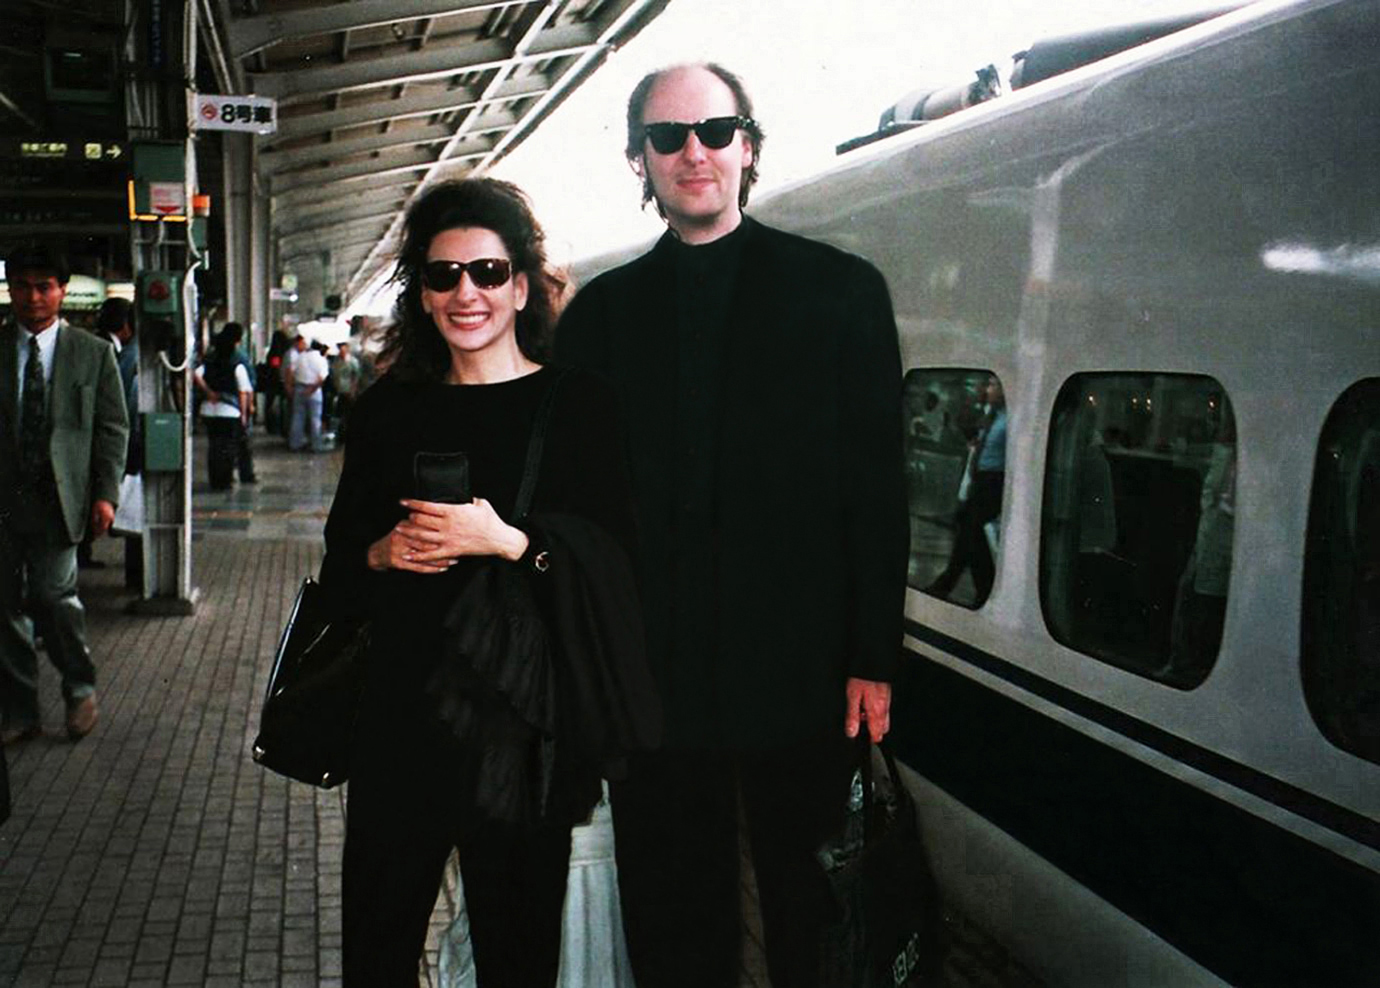 Lucia Aliberti with her Manager Dr. Stefan Schmerbeck⚘Tokyo⚘Concerts⚘Japan Tour⚘:http://www.luciaaliberti.it #luciaaliberti #stefanschmerbeck #tokyo #concerts #japantour